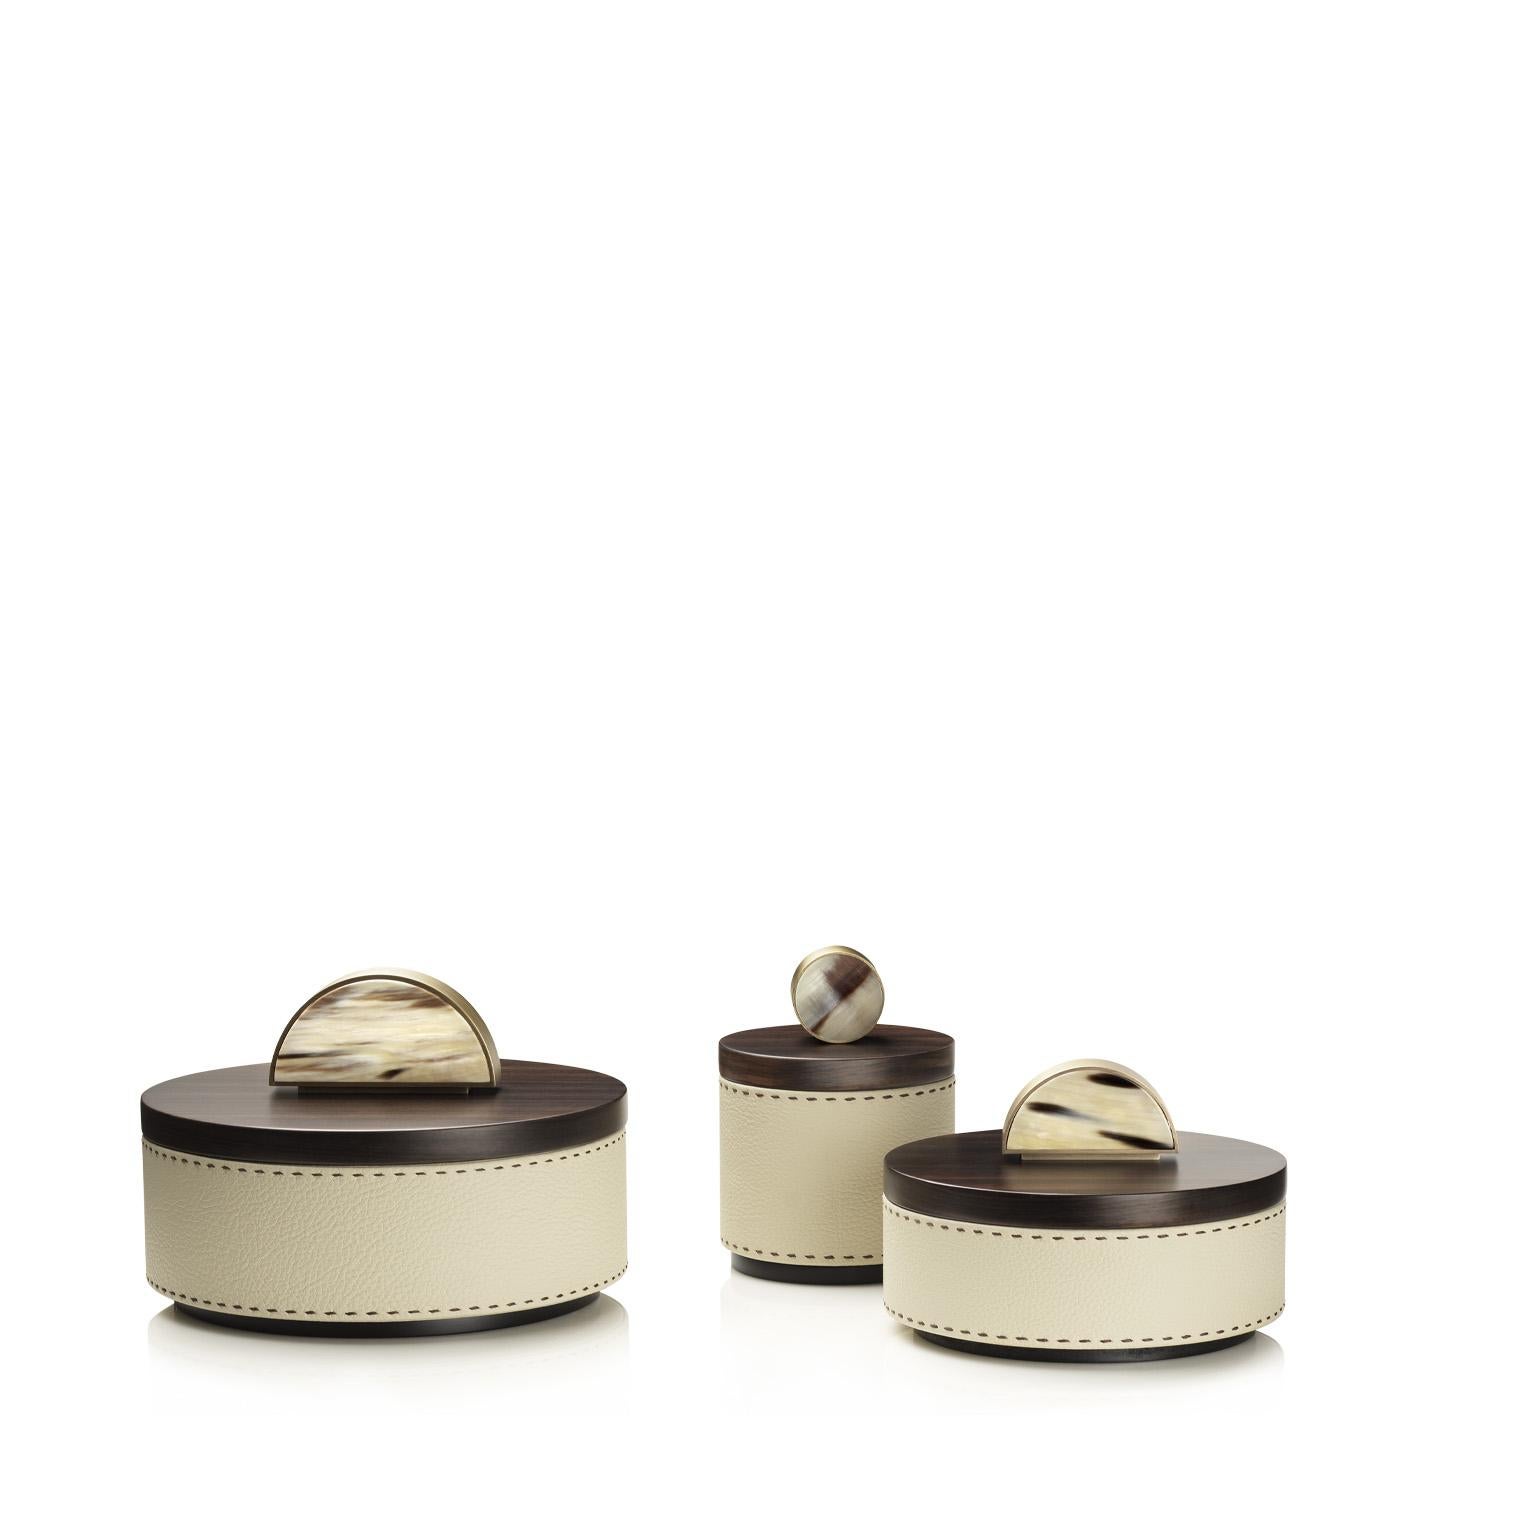 Hand-Crafted Agneta Round Box in Pebbled leather with Handle in Corno Italiano, Mod. 4483 For Sale